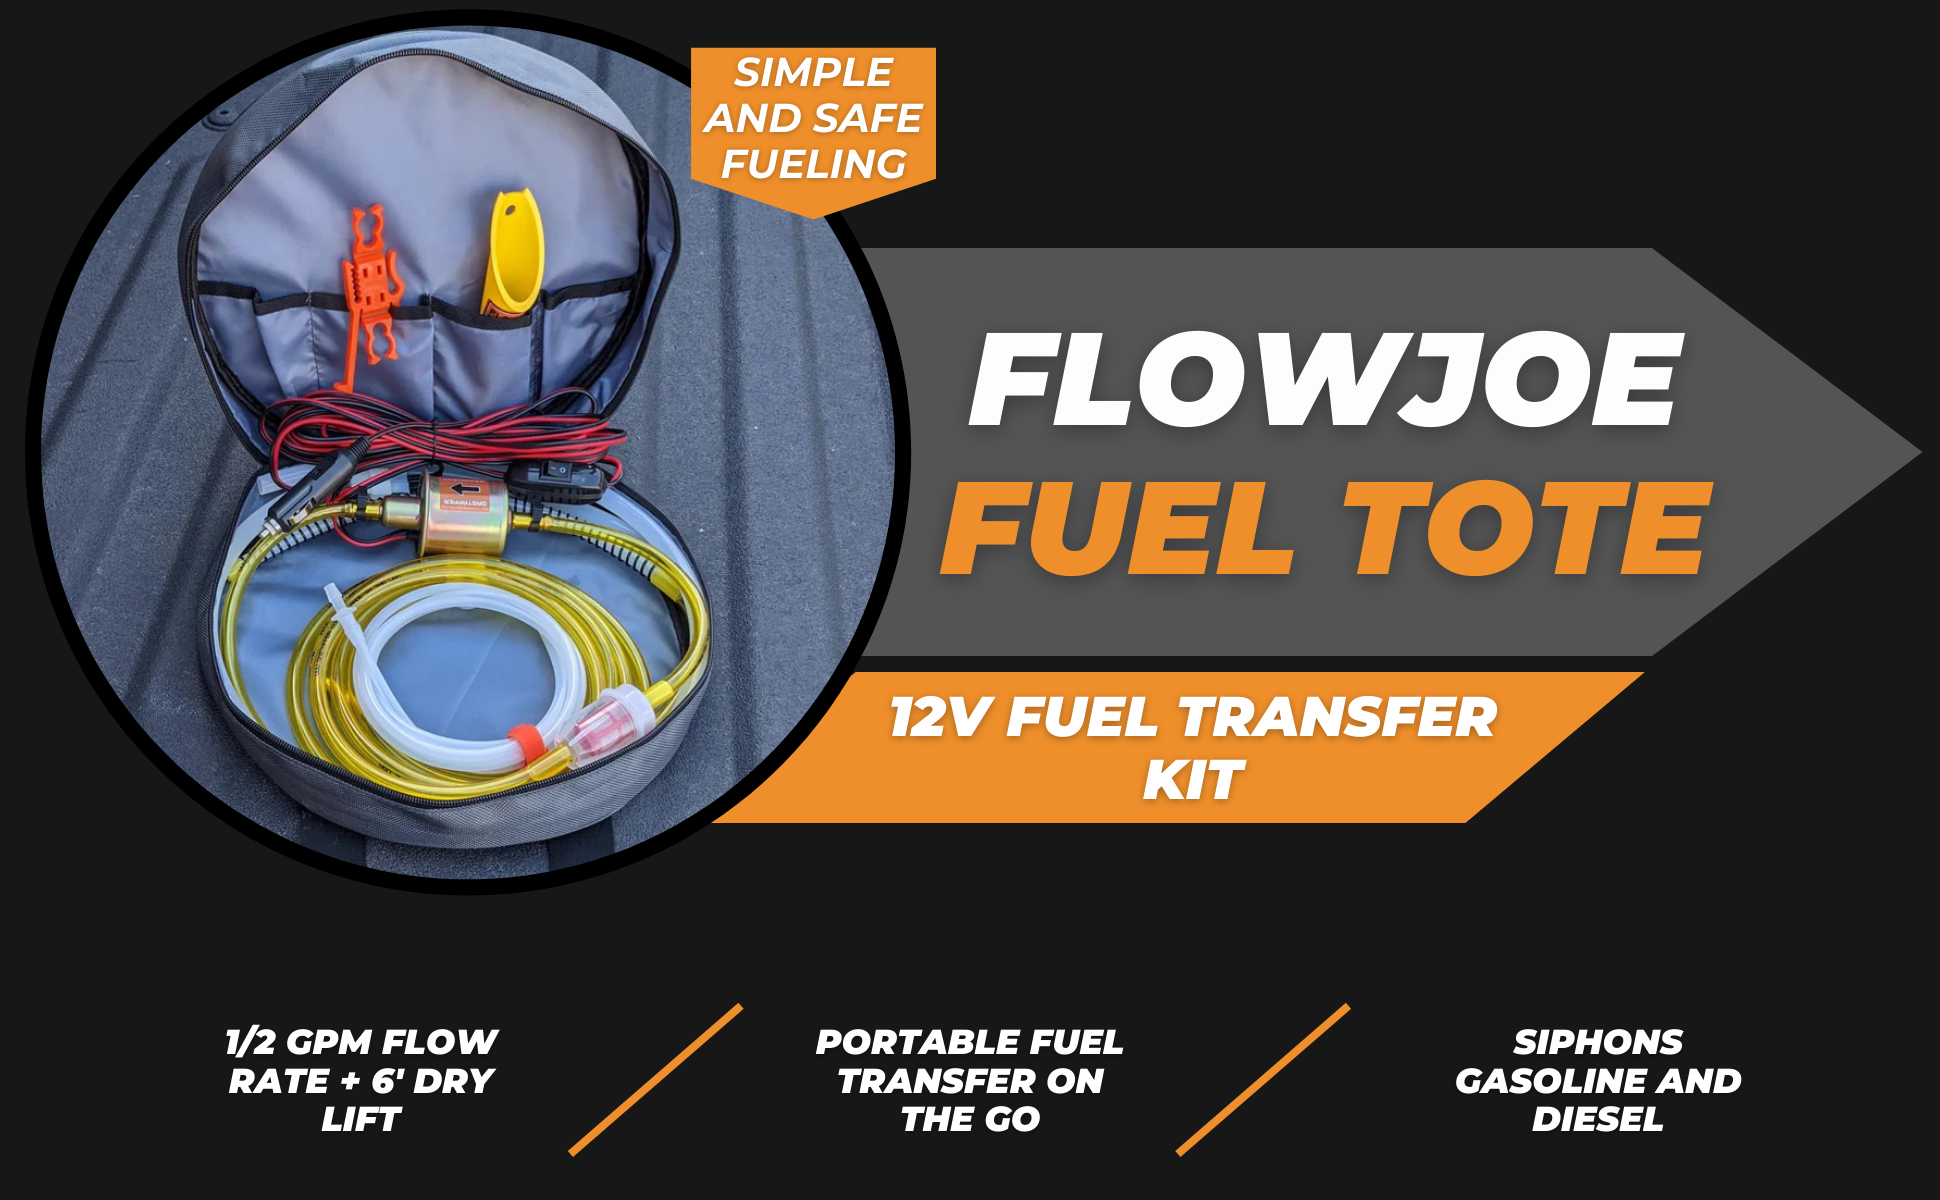 FlowJoe fuel tote transfer kit portable transfer on the go, siphons gasoline and diesel